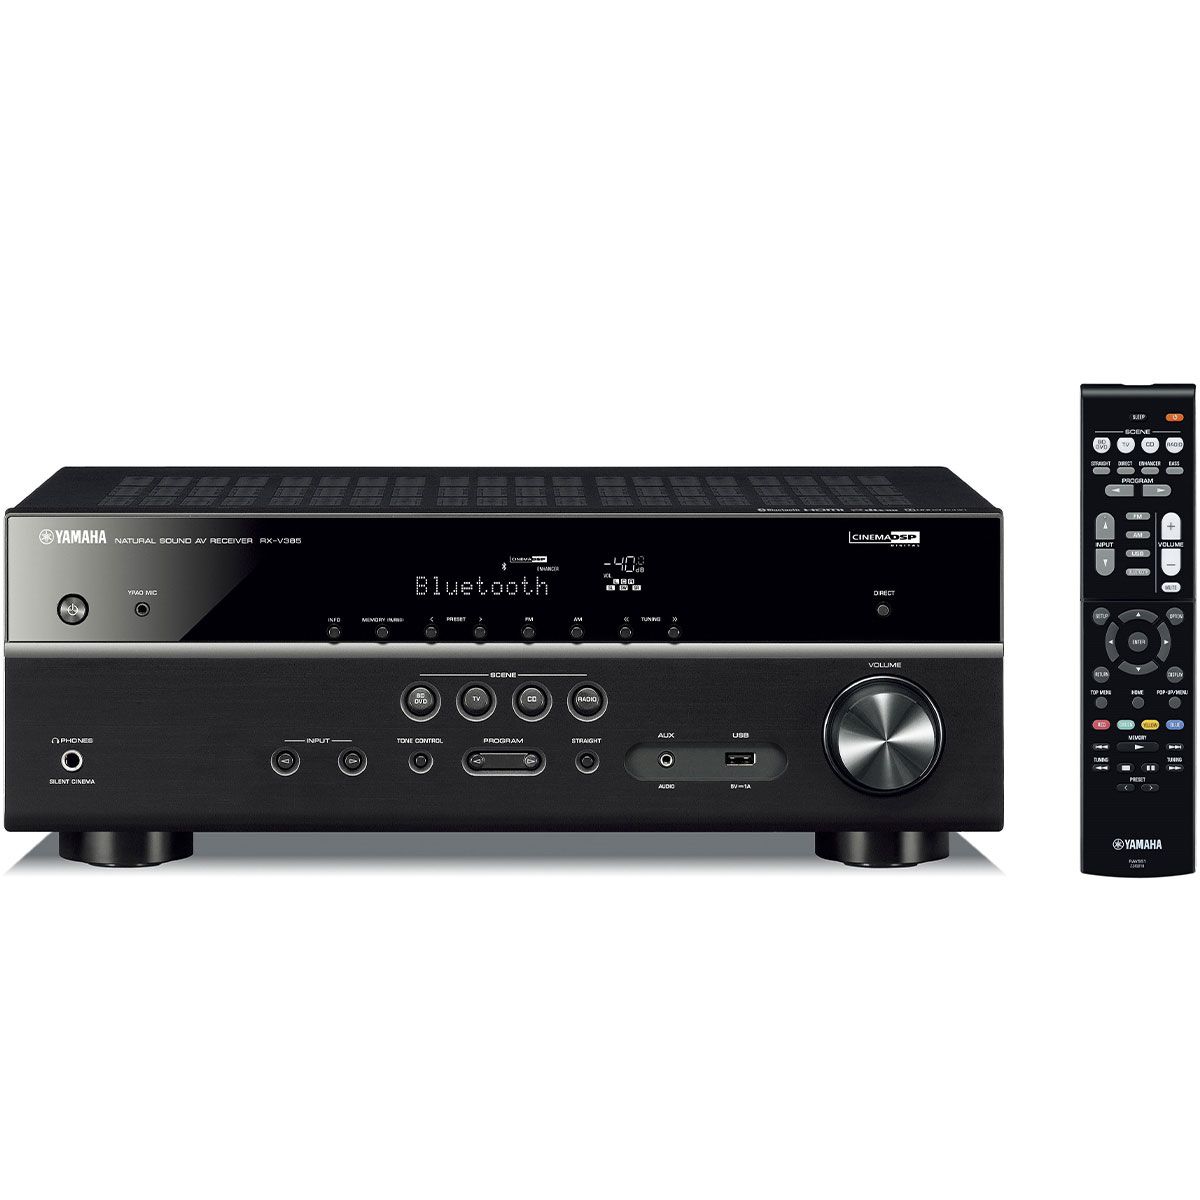 Yamaha RX-V385 5.1-Channel 4K Ultra HD AV Receiver - front view with remote